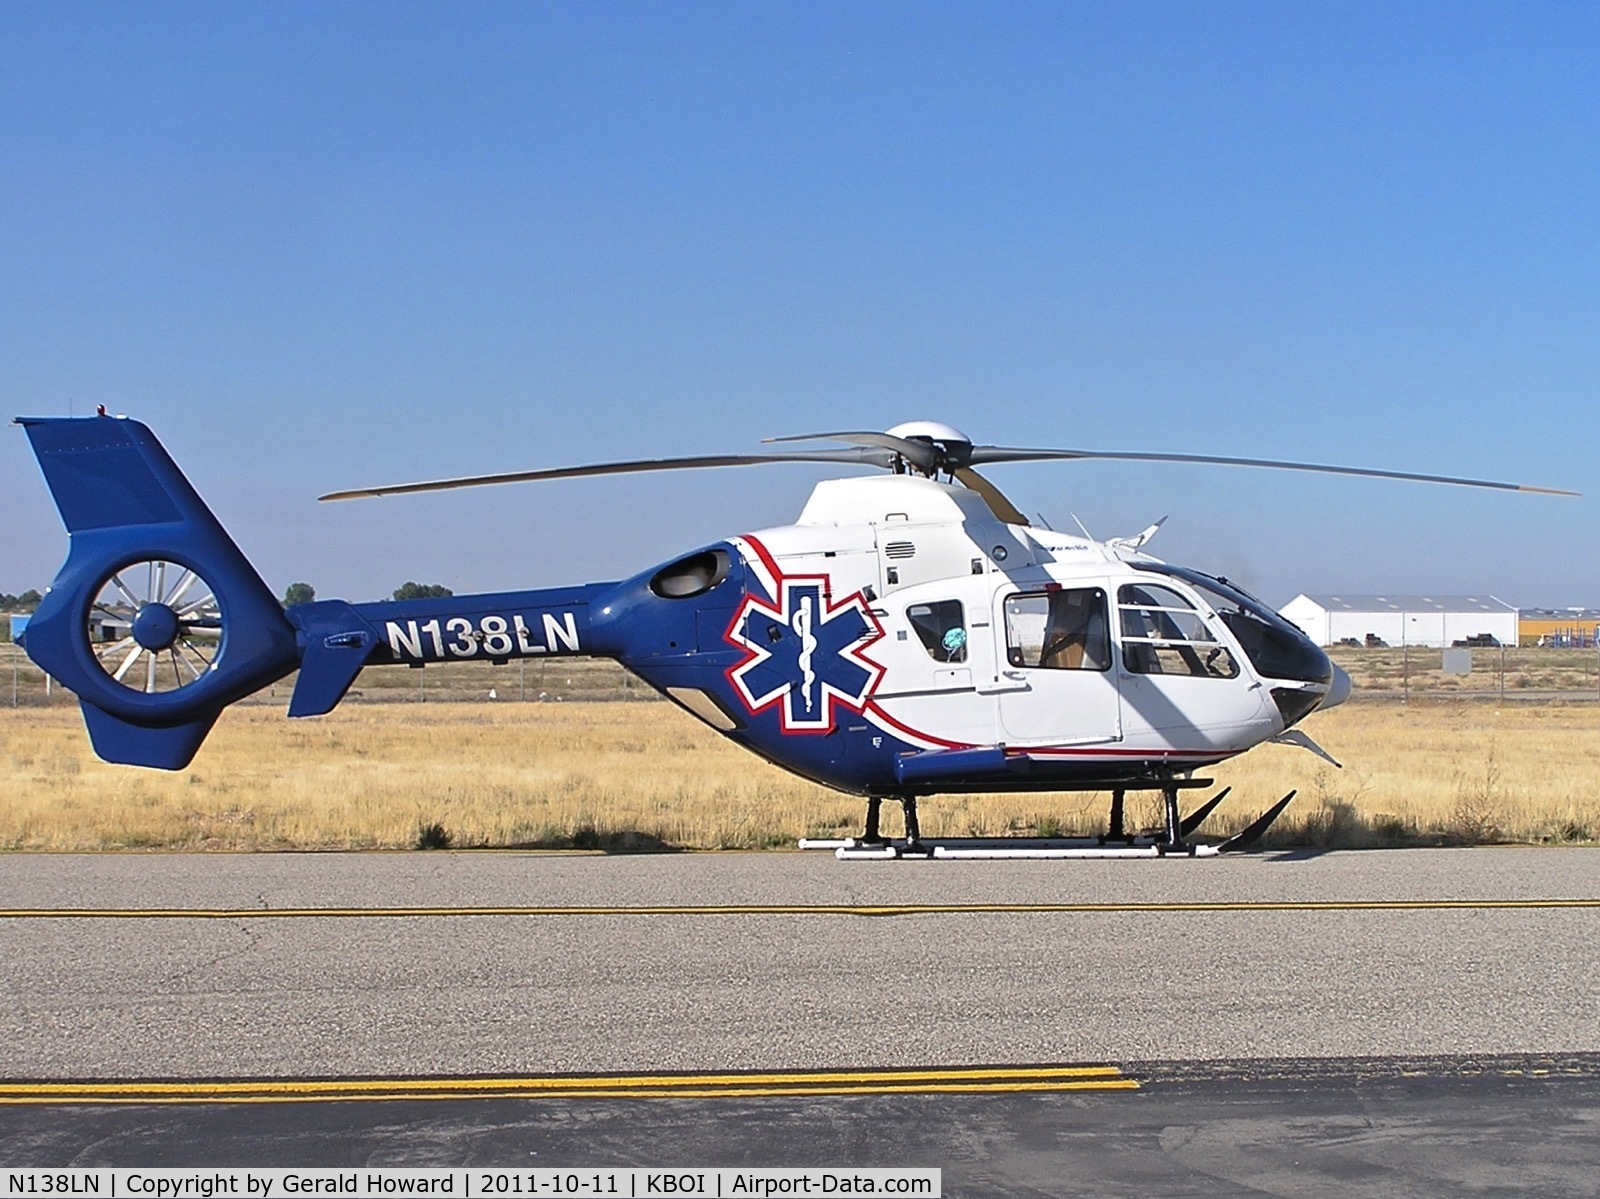 N138LN, 2004 Eurocopter EC-135P-2 C/N 0352, Parked on the Life Flight Ramp.